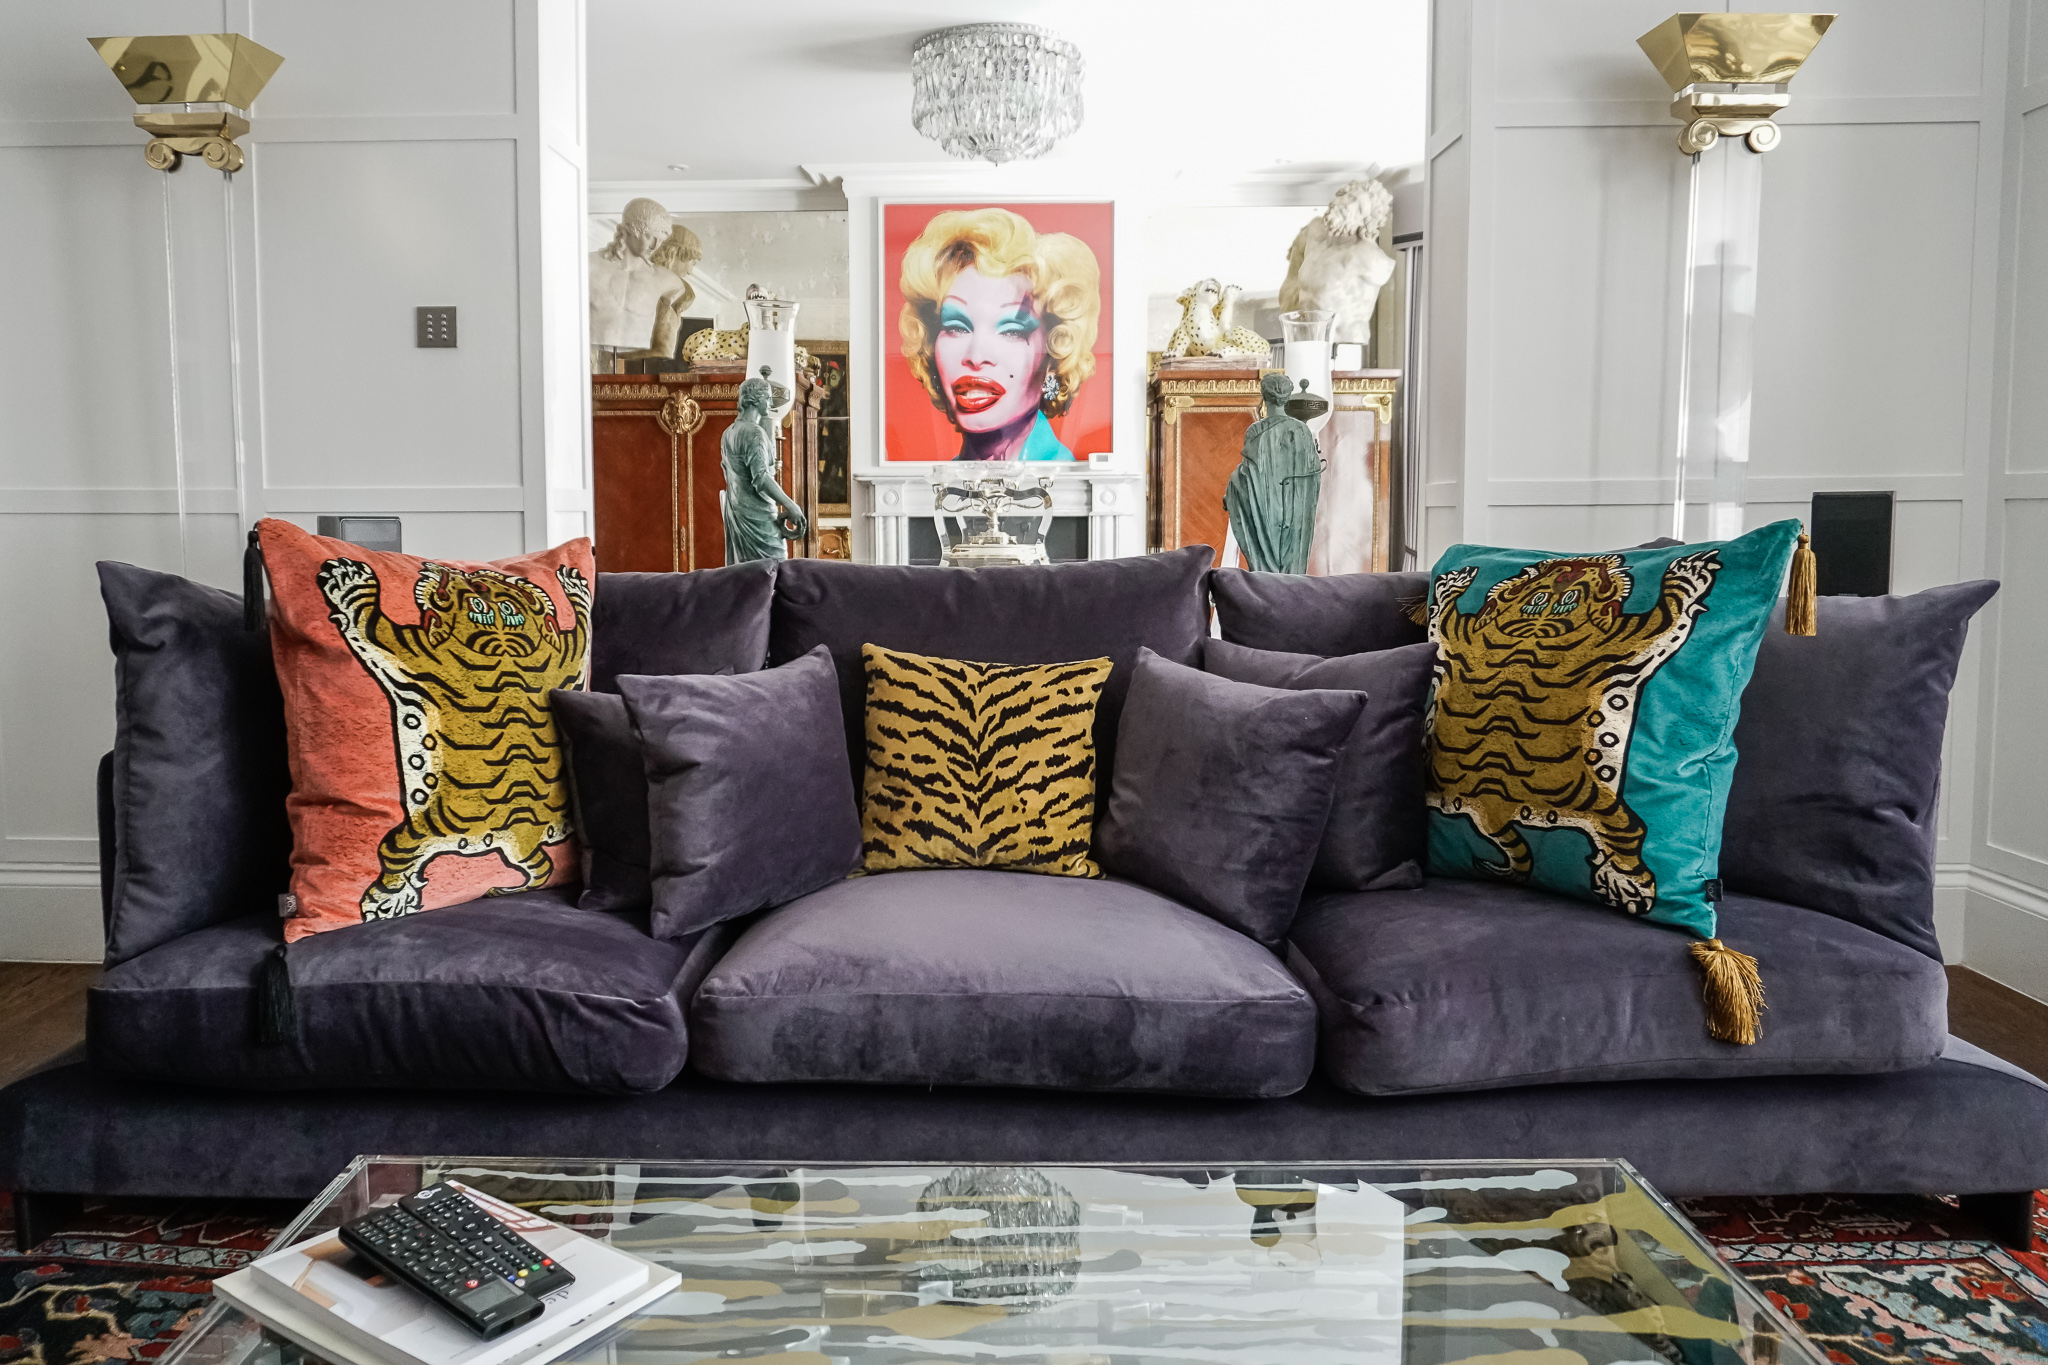 Re-covered purple sofa with tiger cushions